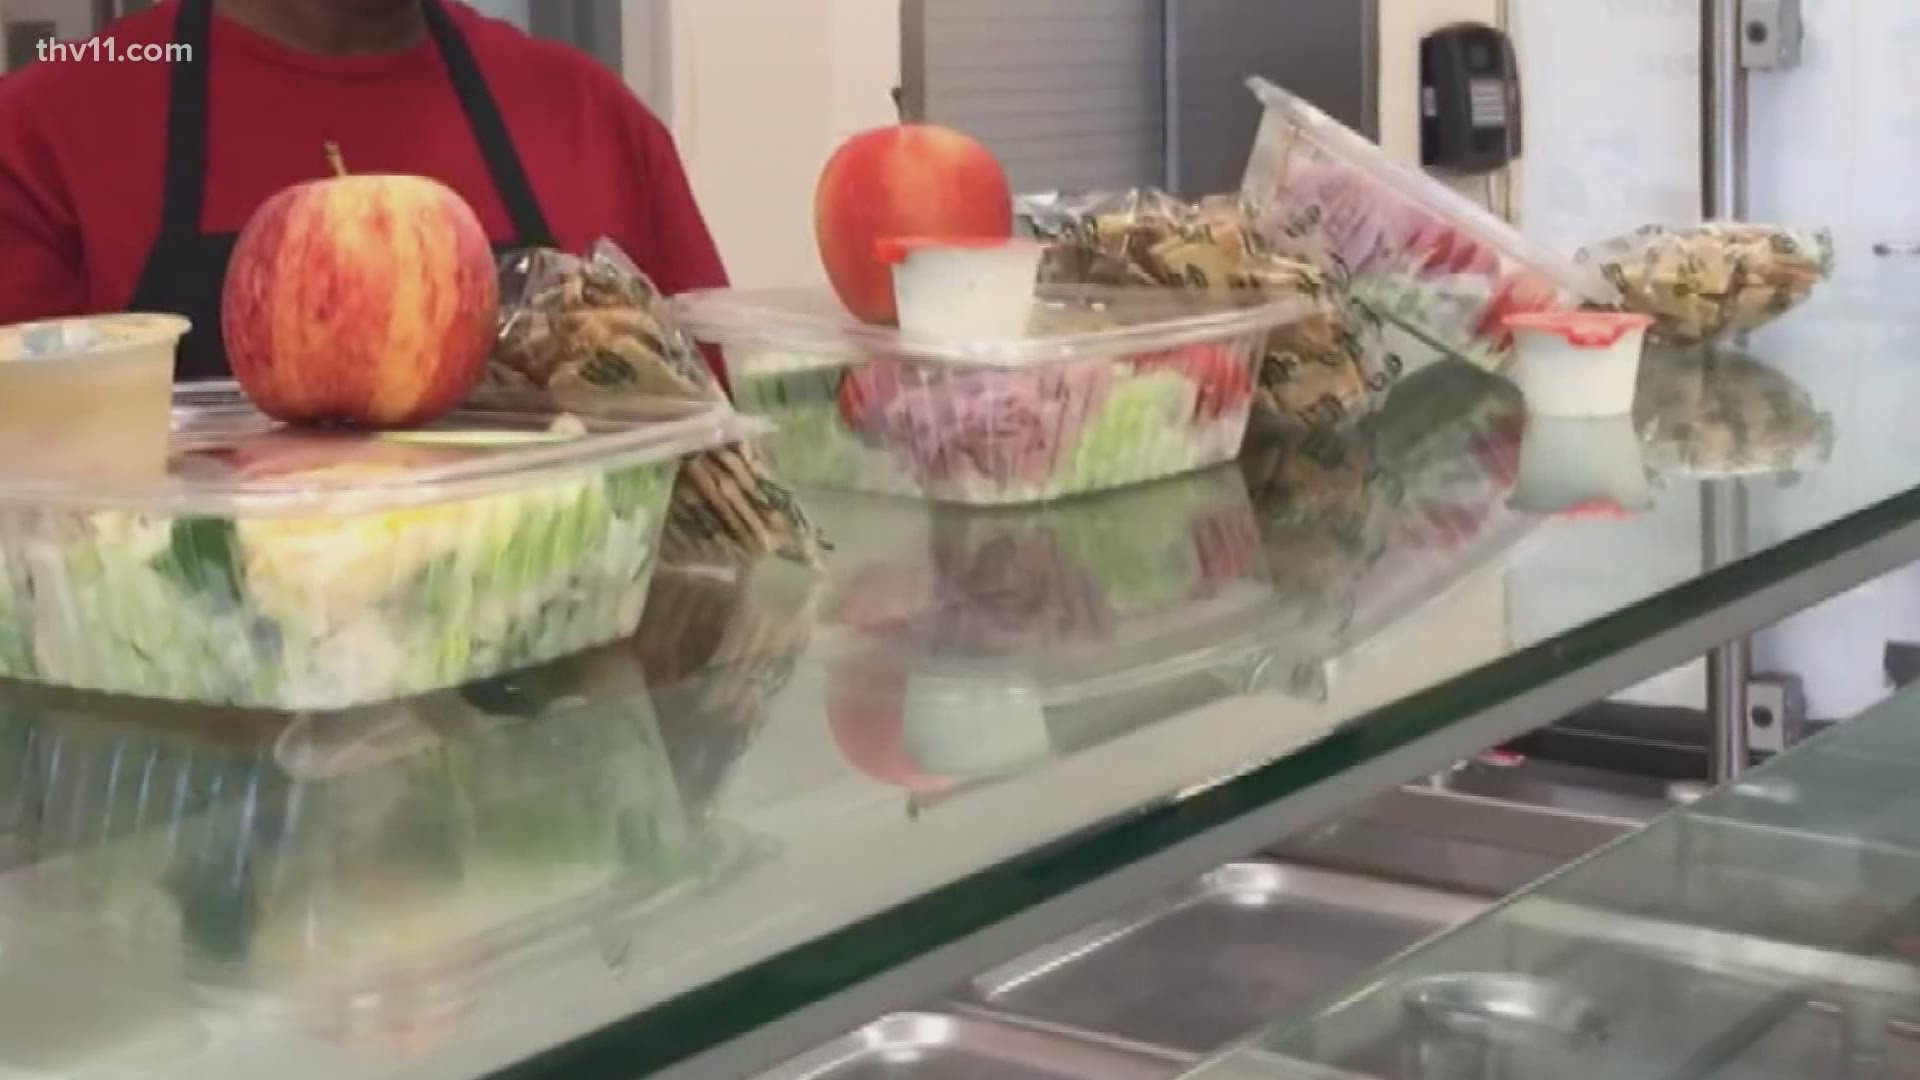 Although no one is required to pay until the end of the year, schools in Arkansas say applications for free or reduced lunches are down.